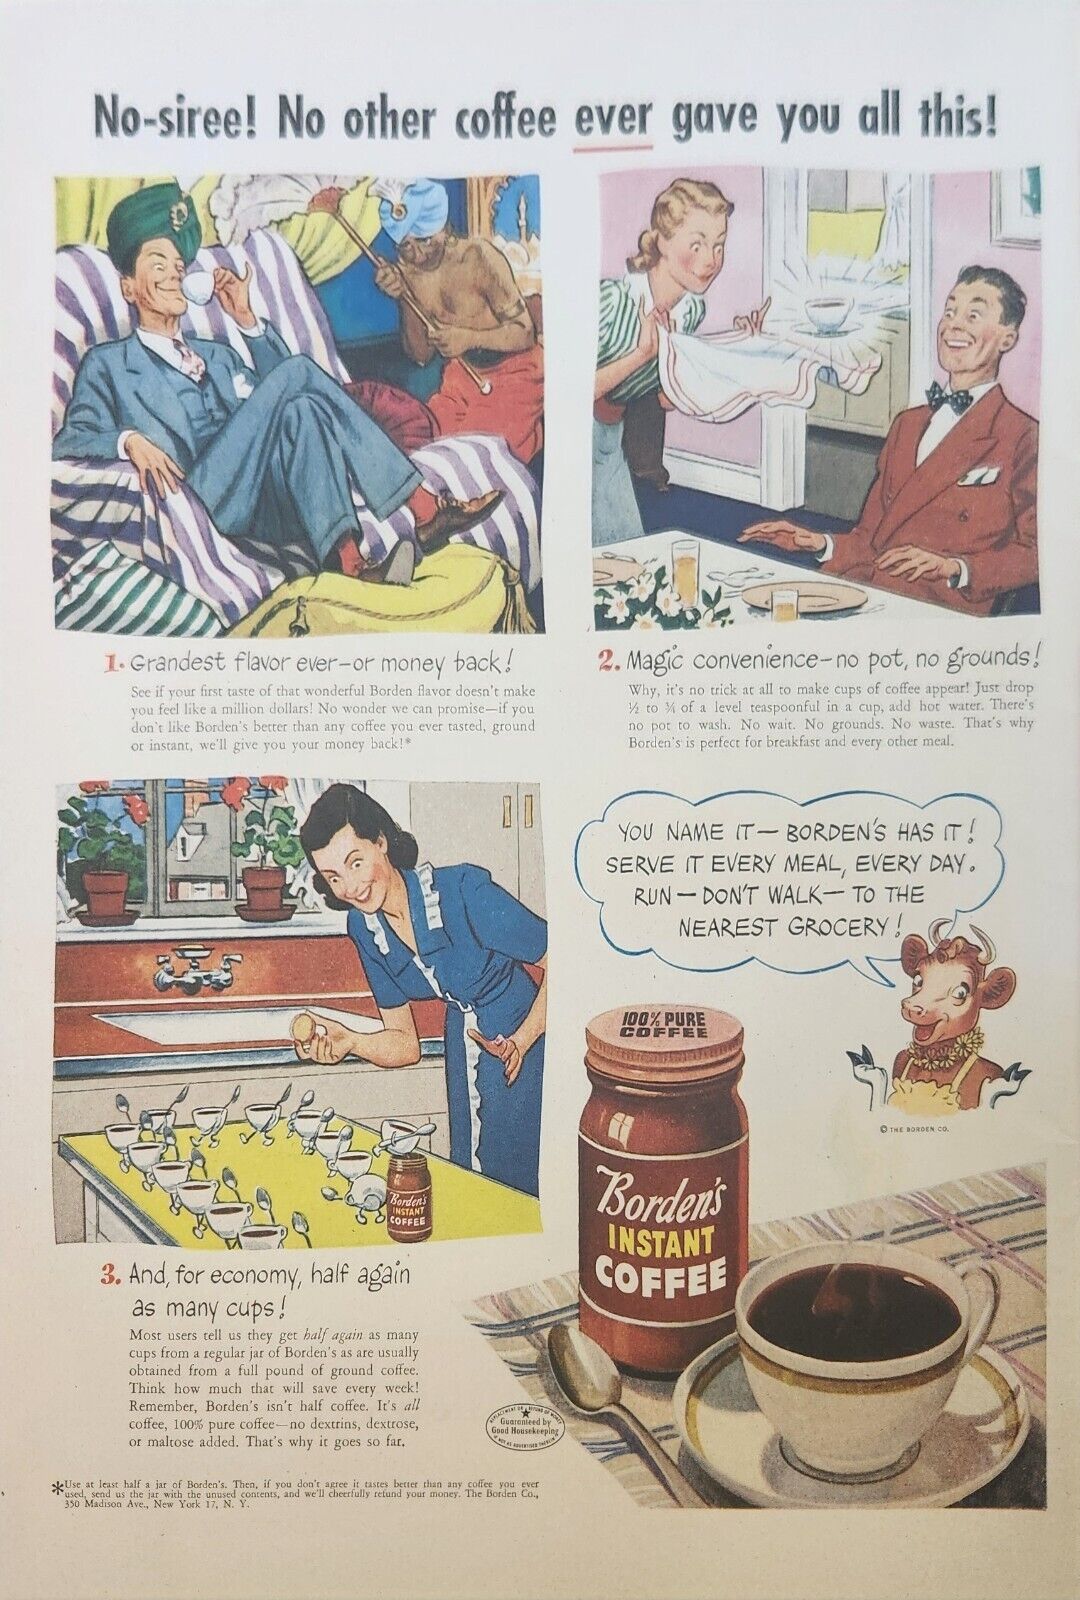 1947 Bordens Instant Coffee Vintage Ad no other coffee ever gave you all this